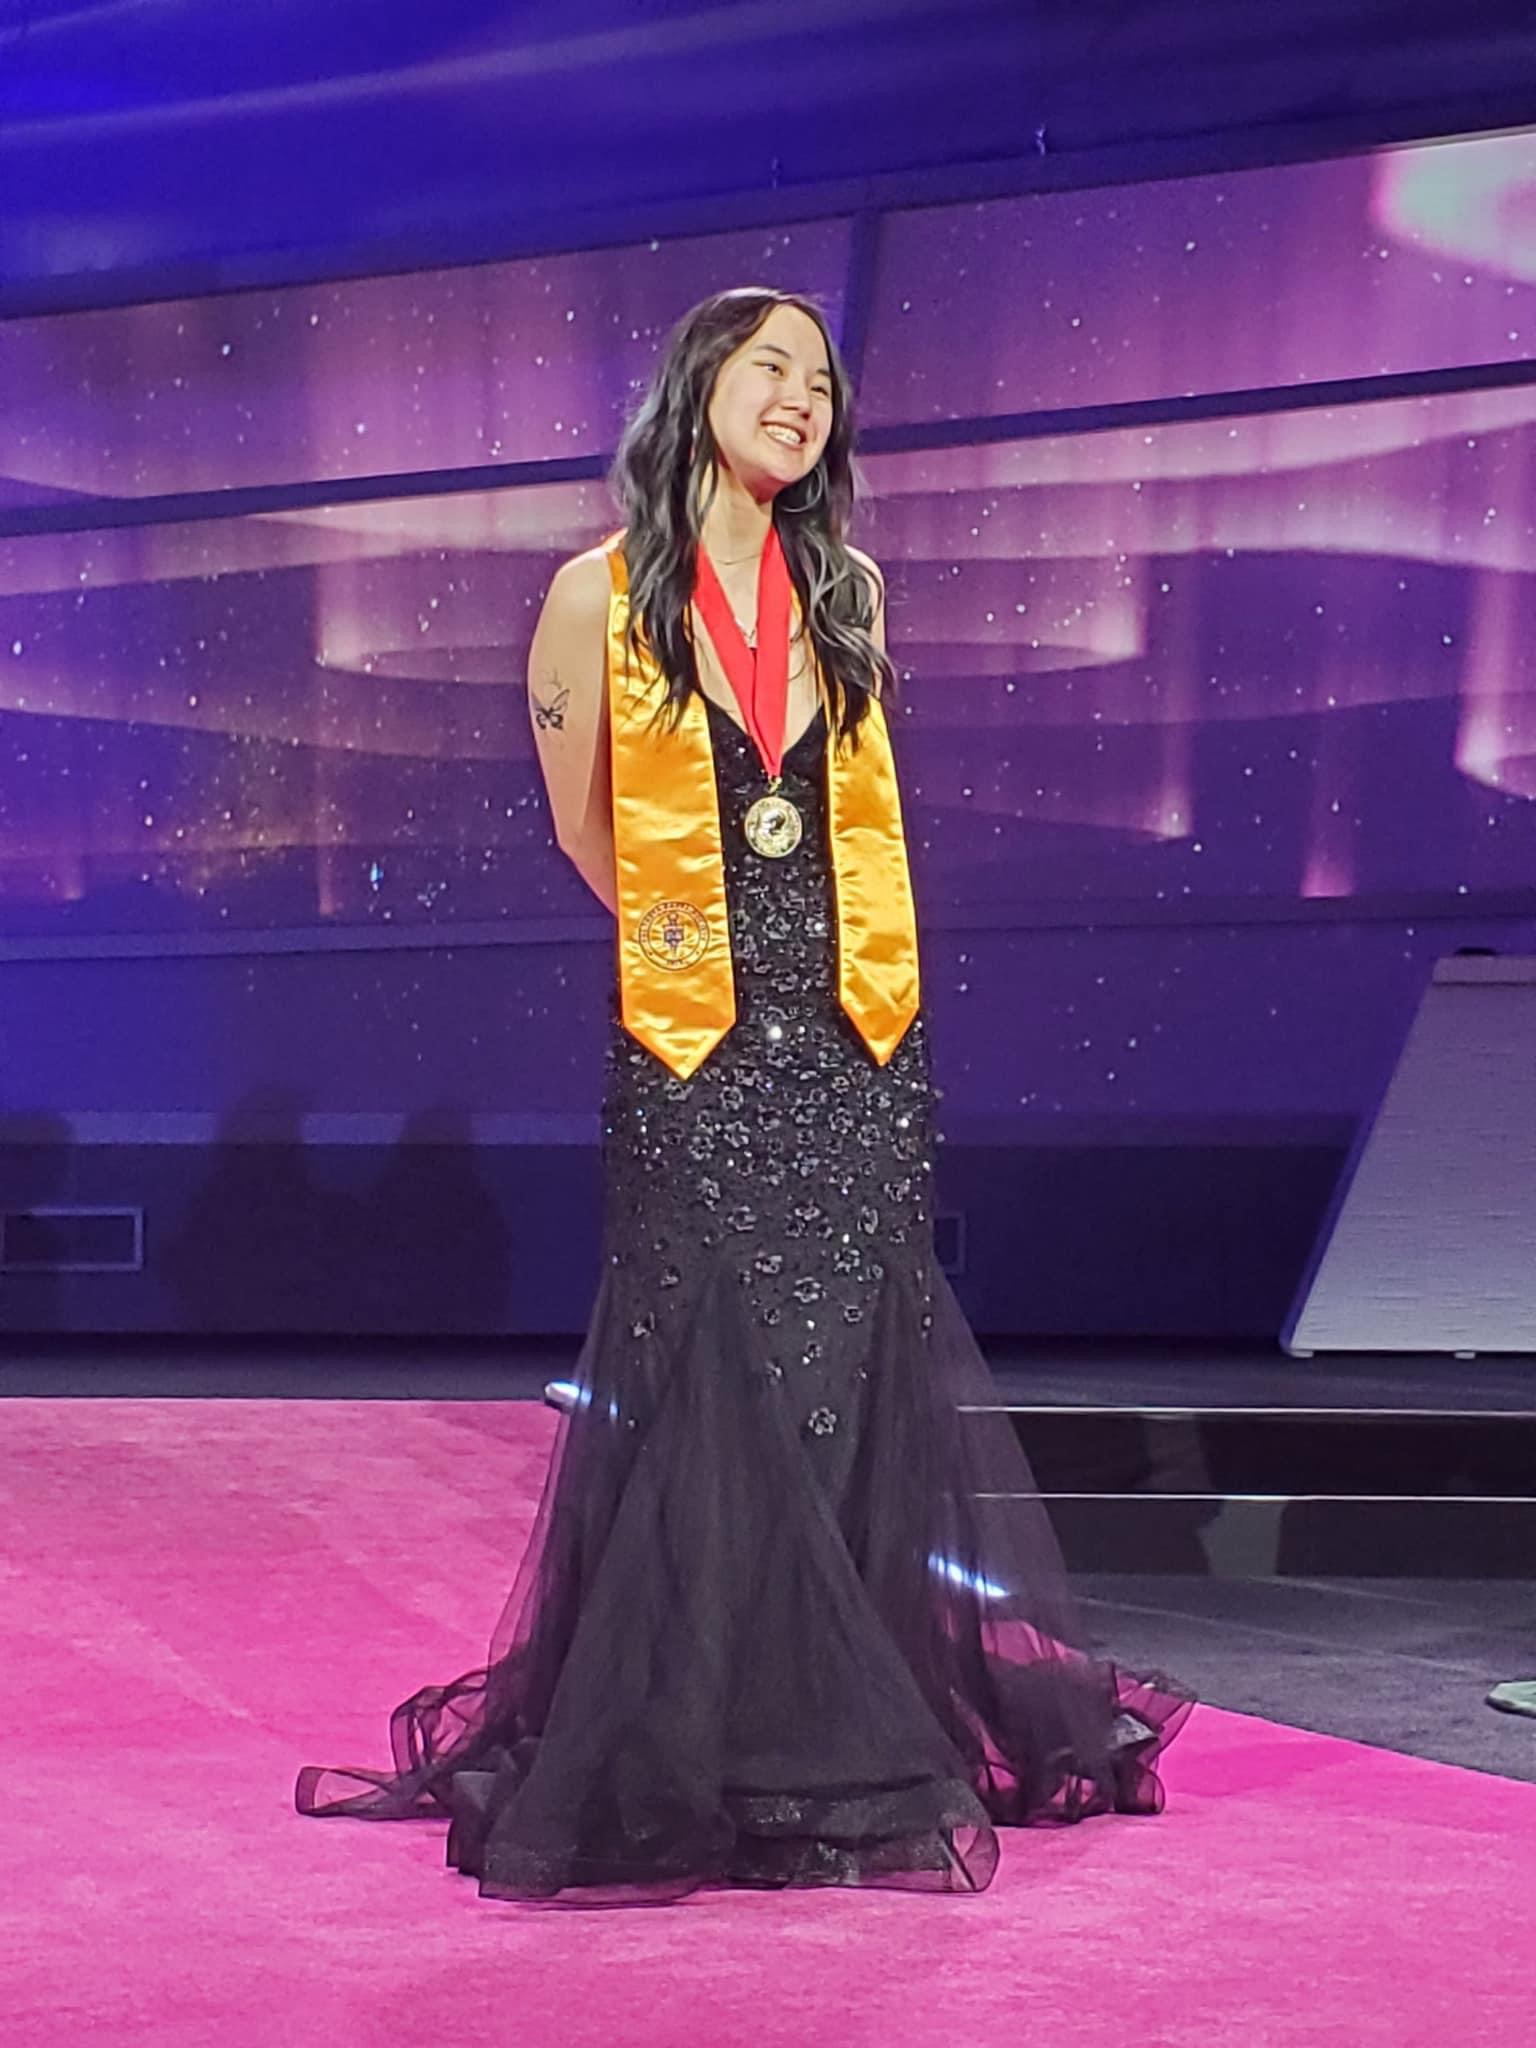 Annalise Smith wins PTK international president in blue gown with red medal